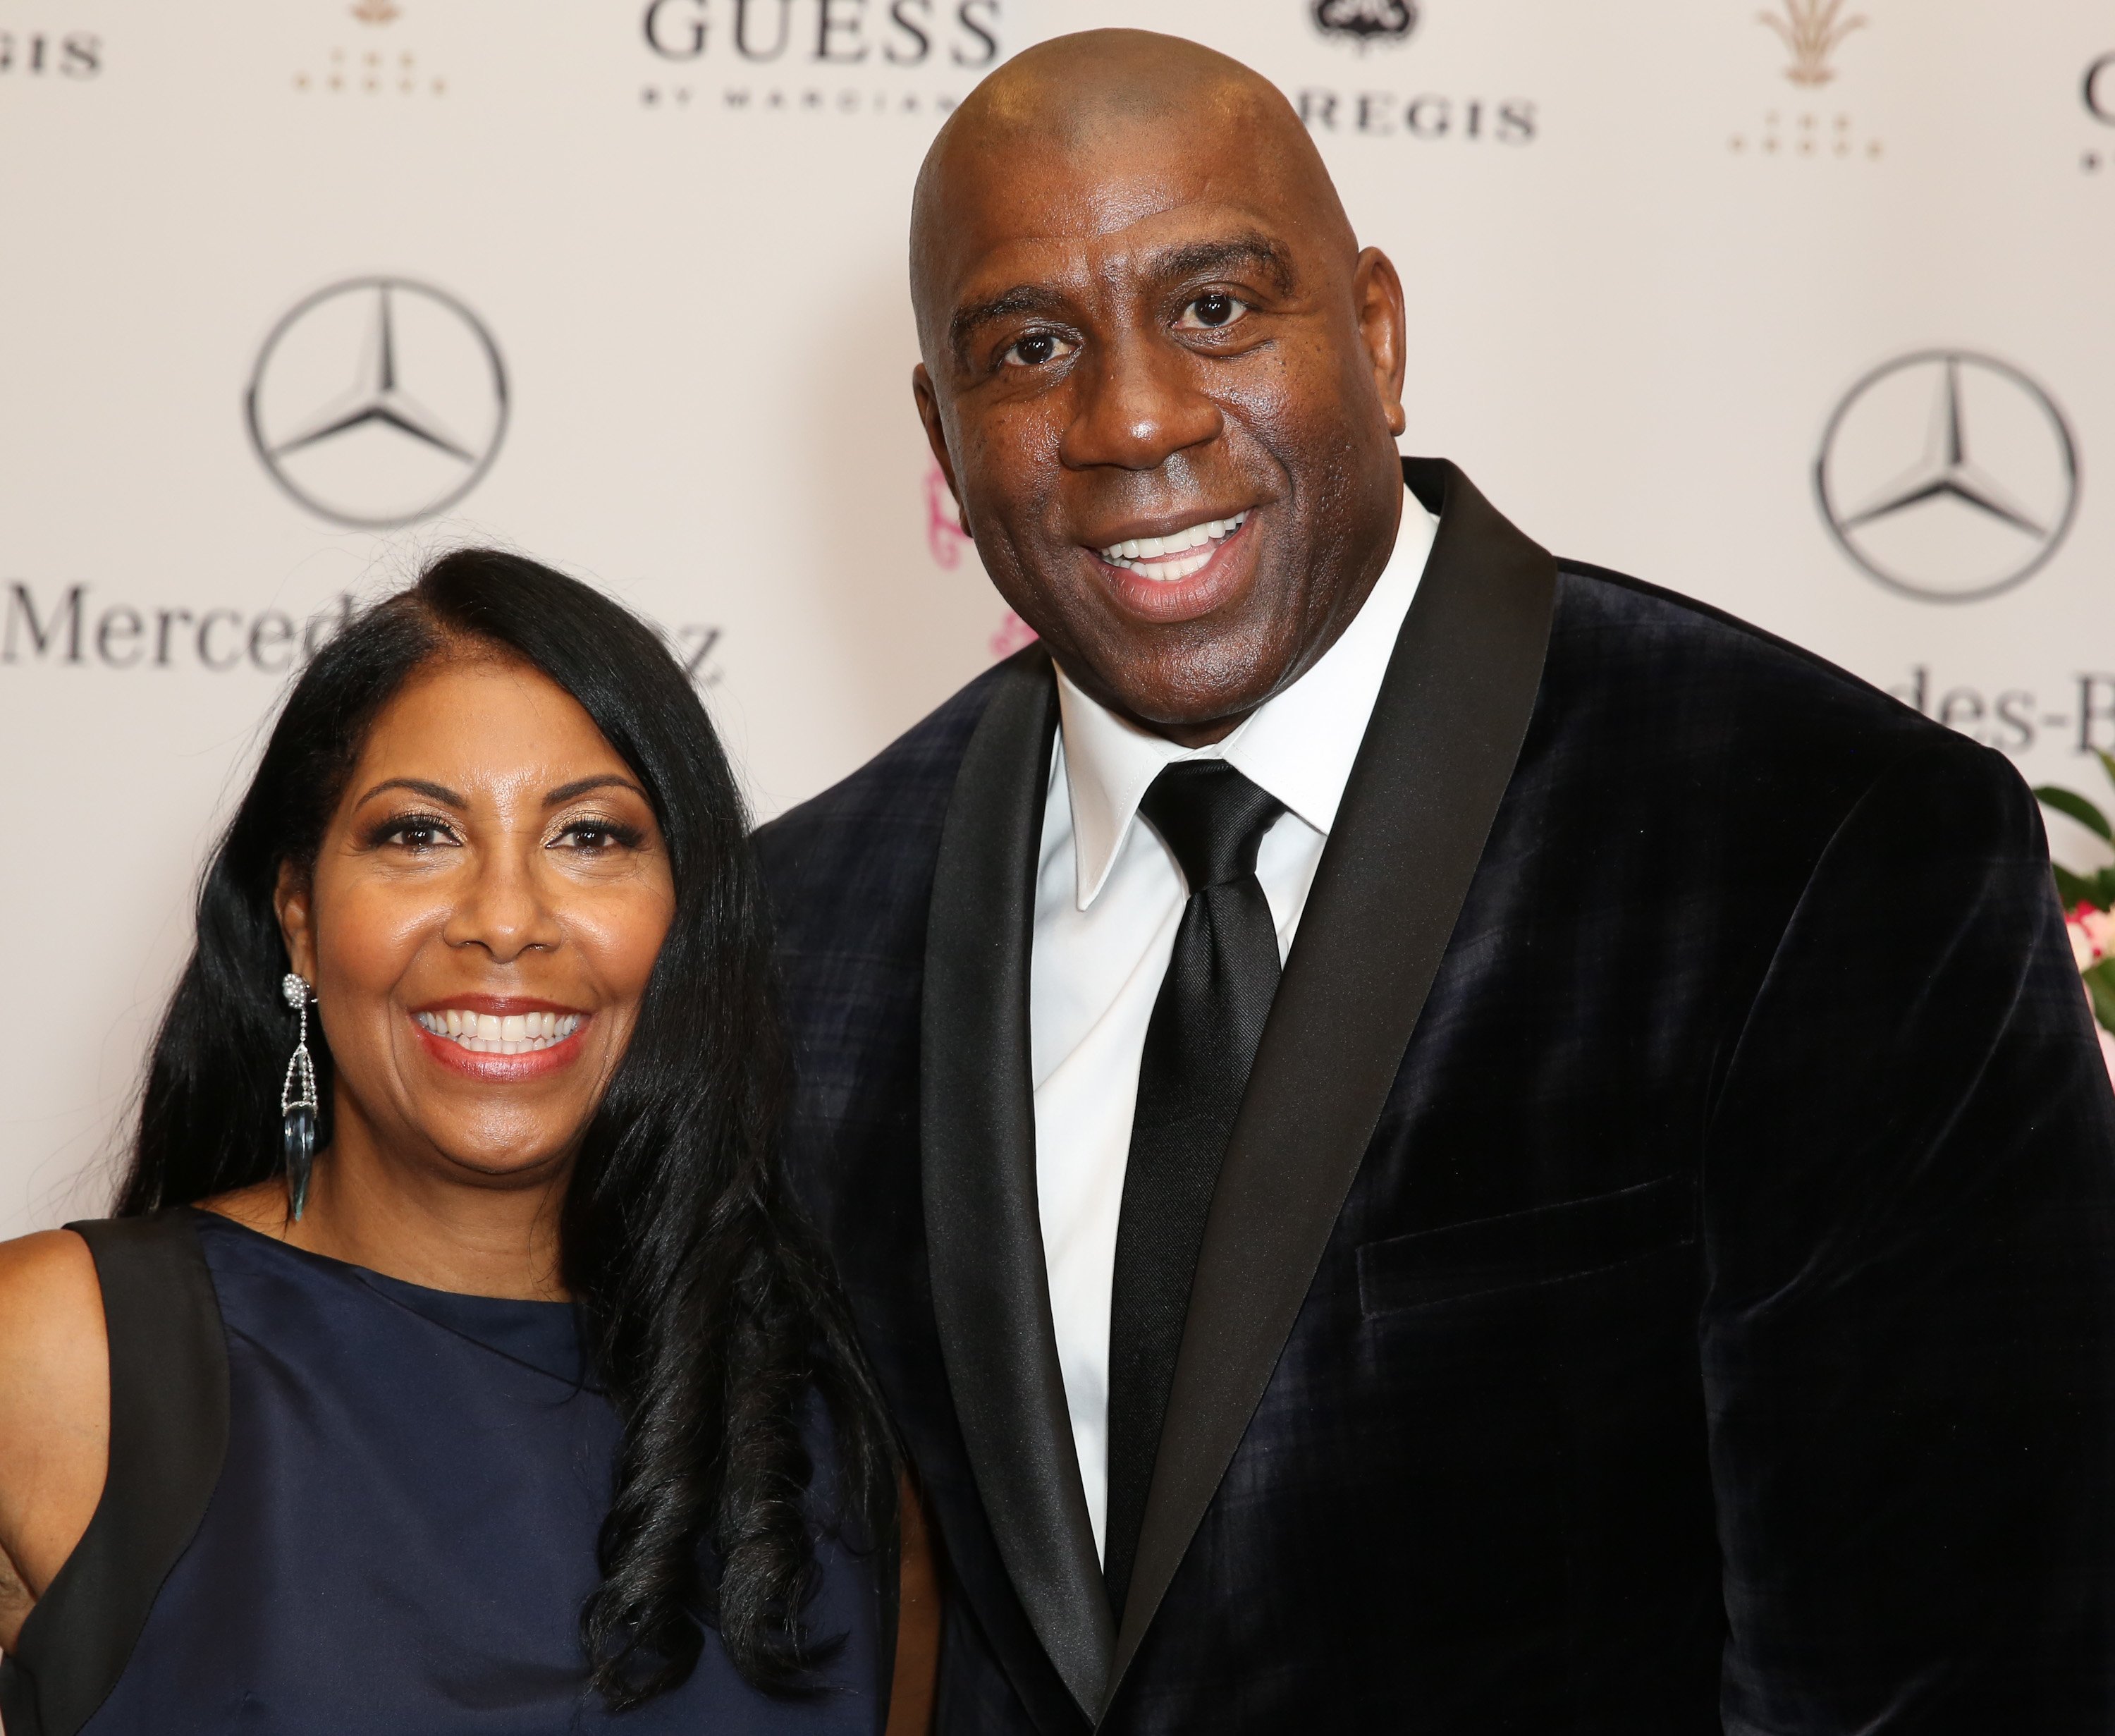 Earvin Magic Johnson and his wife Cookie Johnson at an event | Photo: GEtty Images